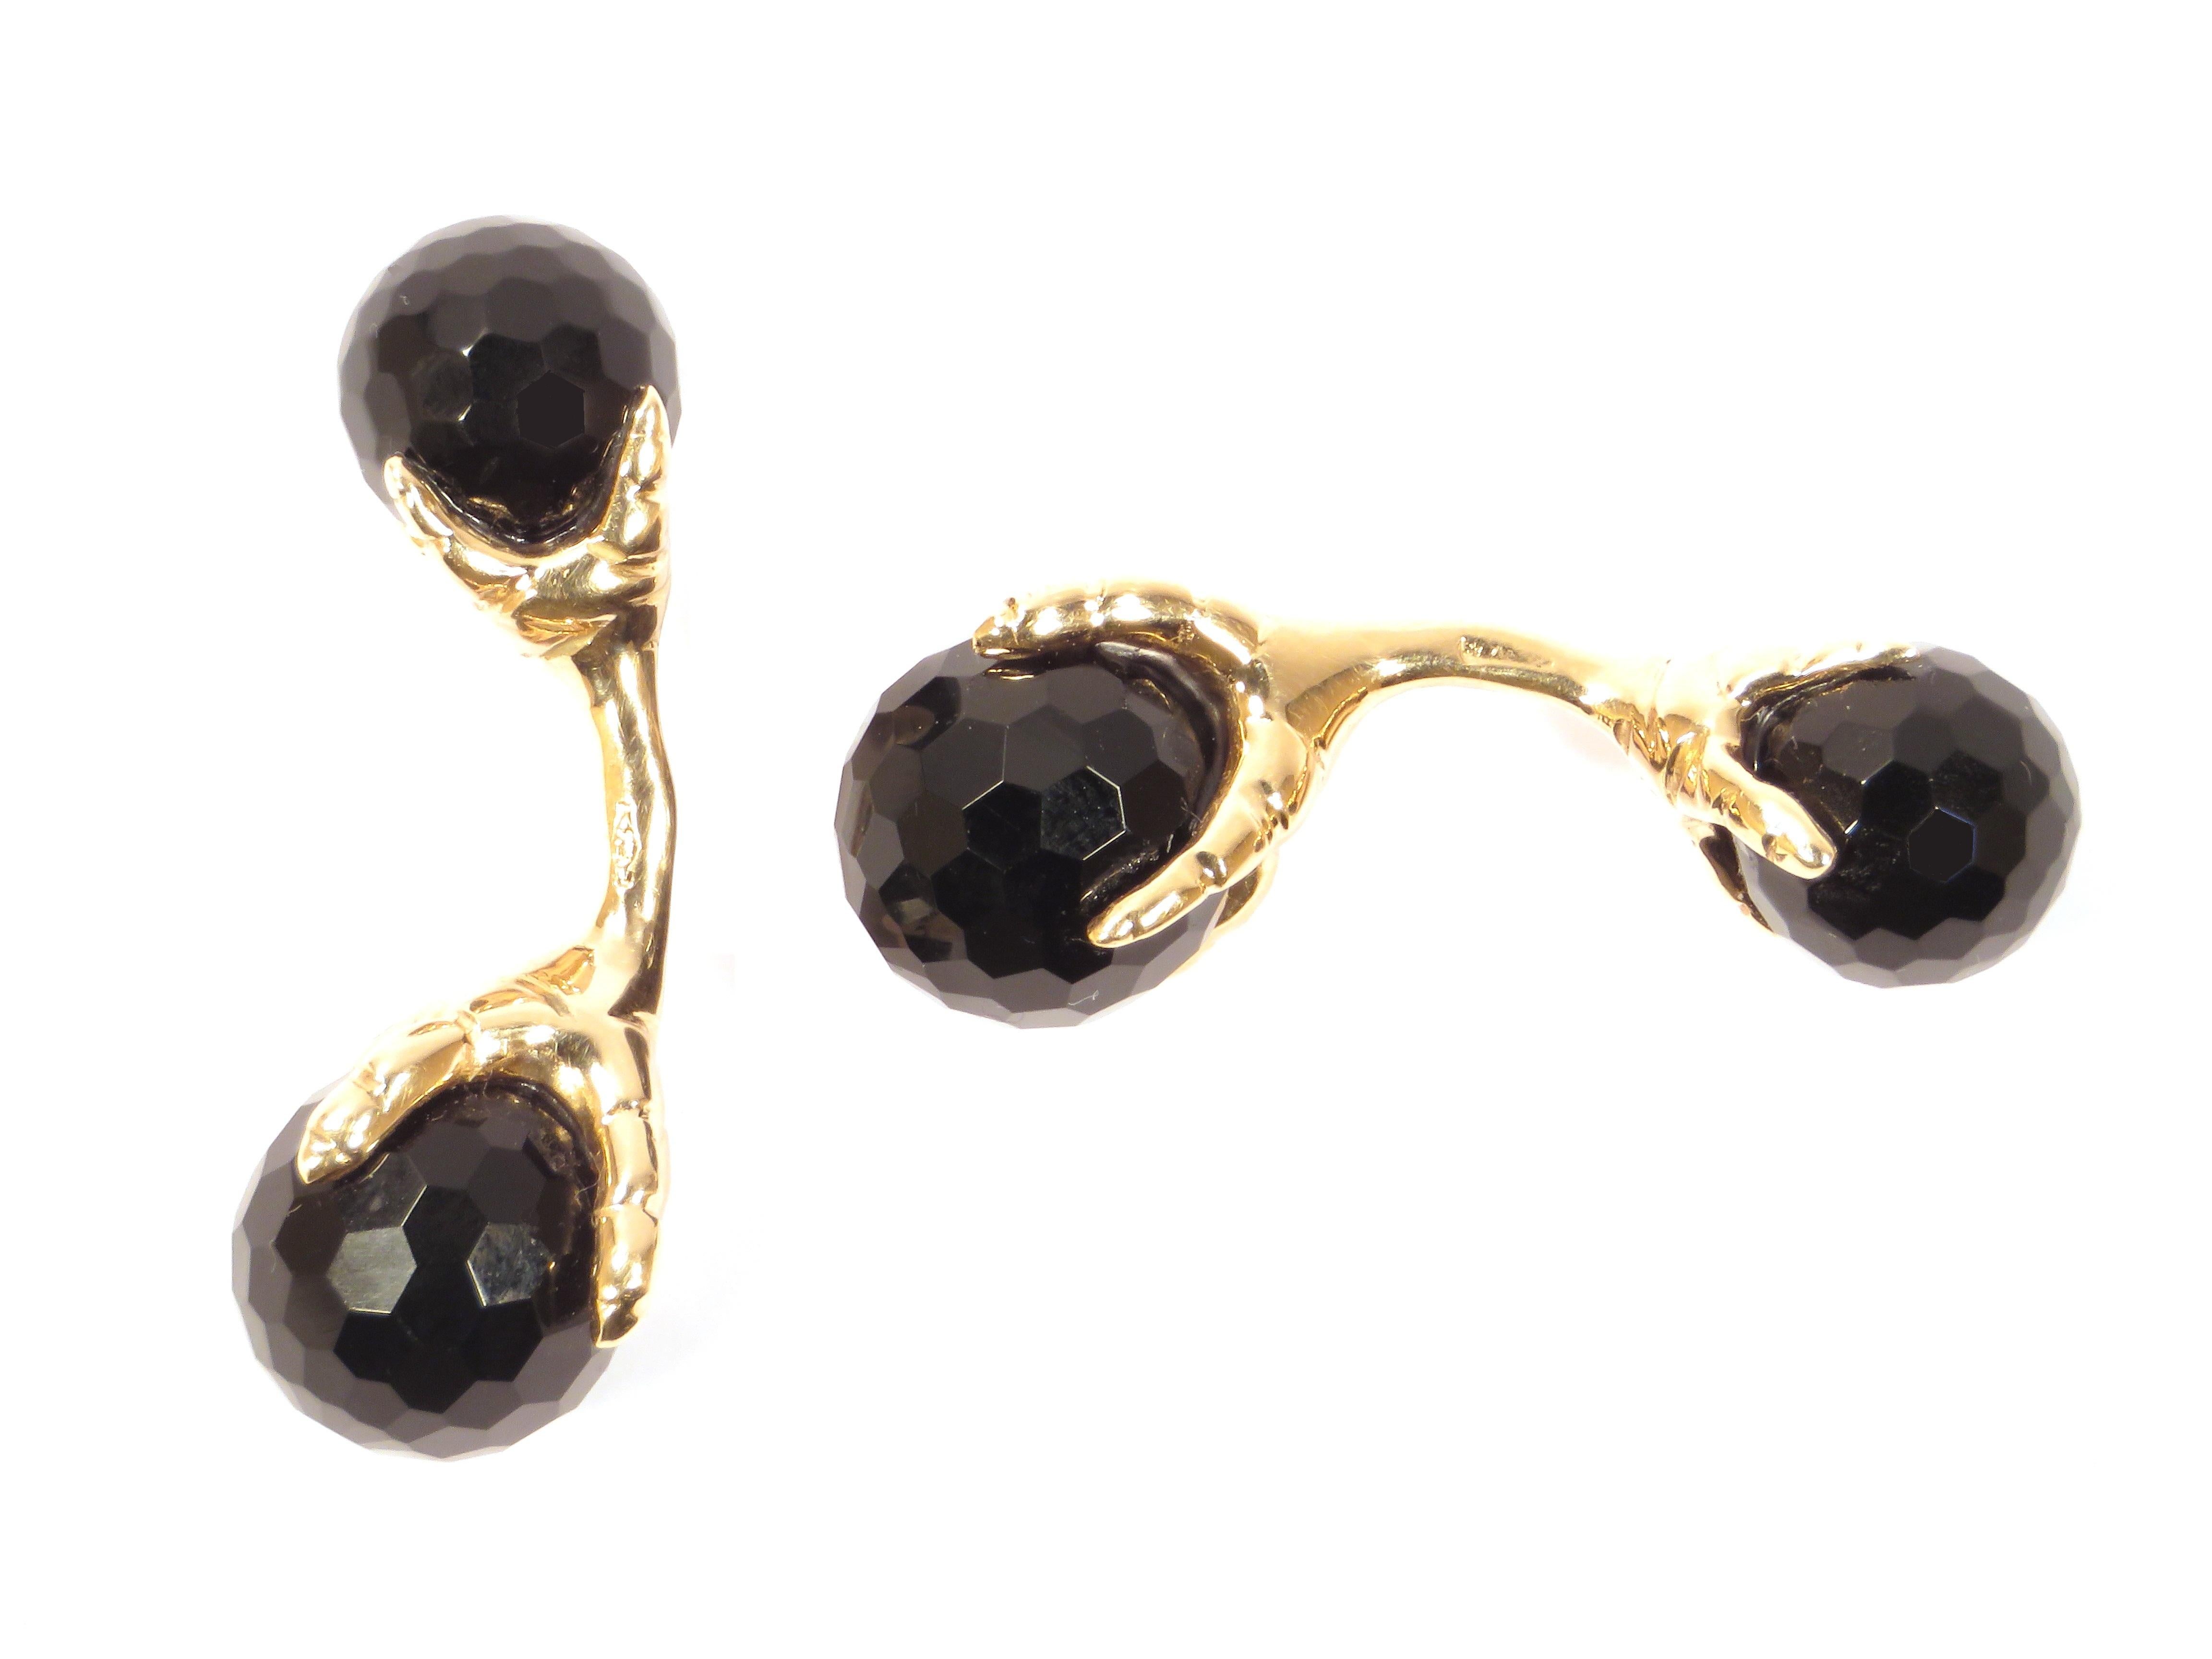 Beautiful cufflinks crafted in 9k rose gold featuring eagle talons grabbing faceted onyx beads. The size of the bigger beads is 12 millimeters / 0.472 inches and of the smaller ones is 10 millimeters / 0.393 inches.  These cufflinks are handcrafted